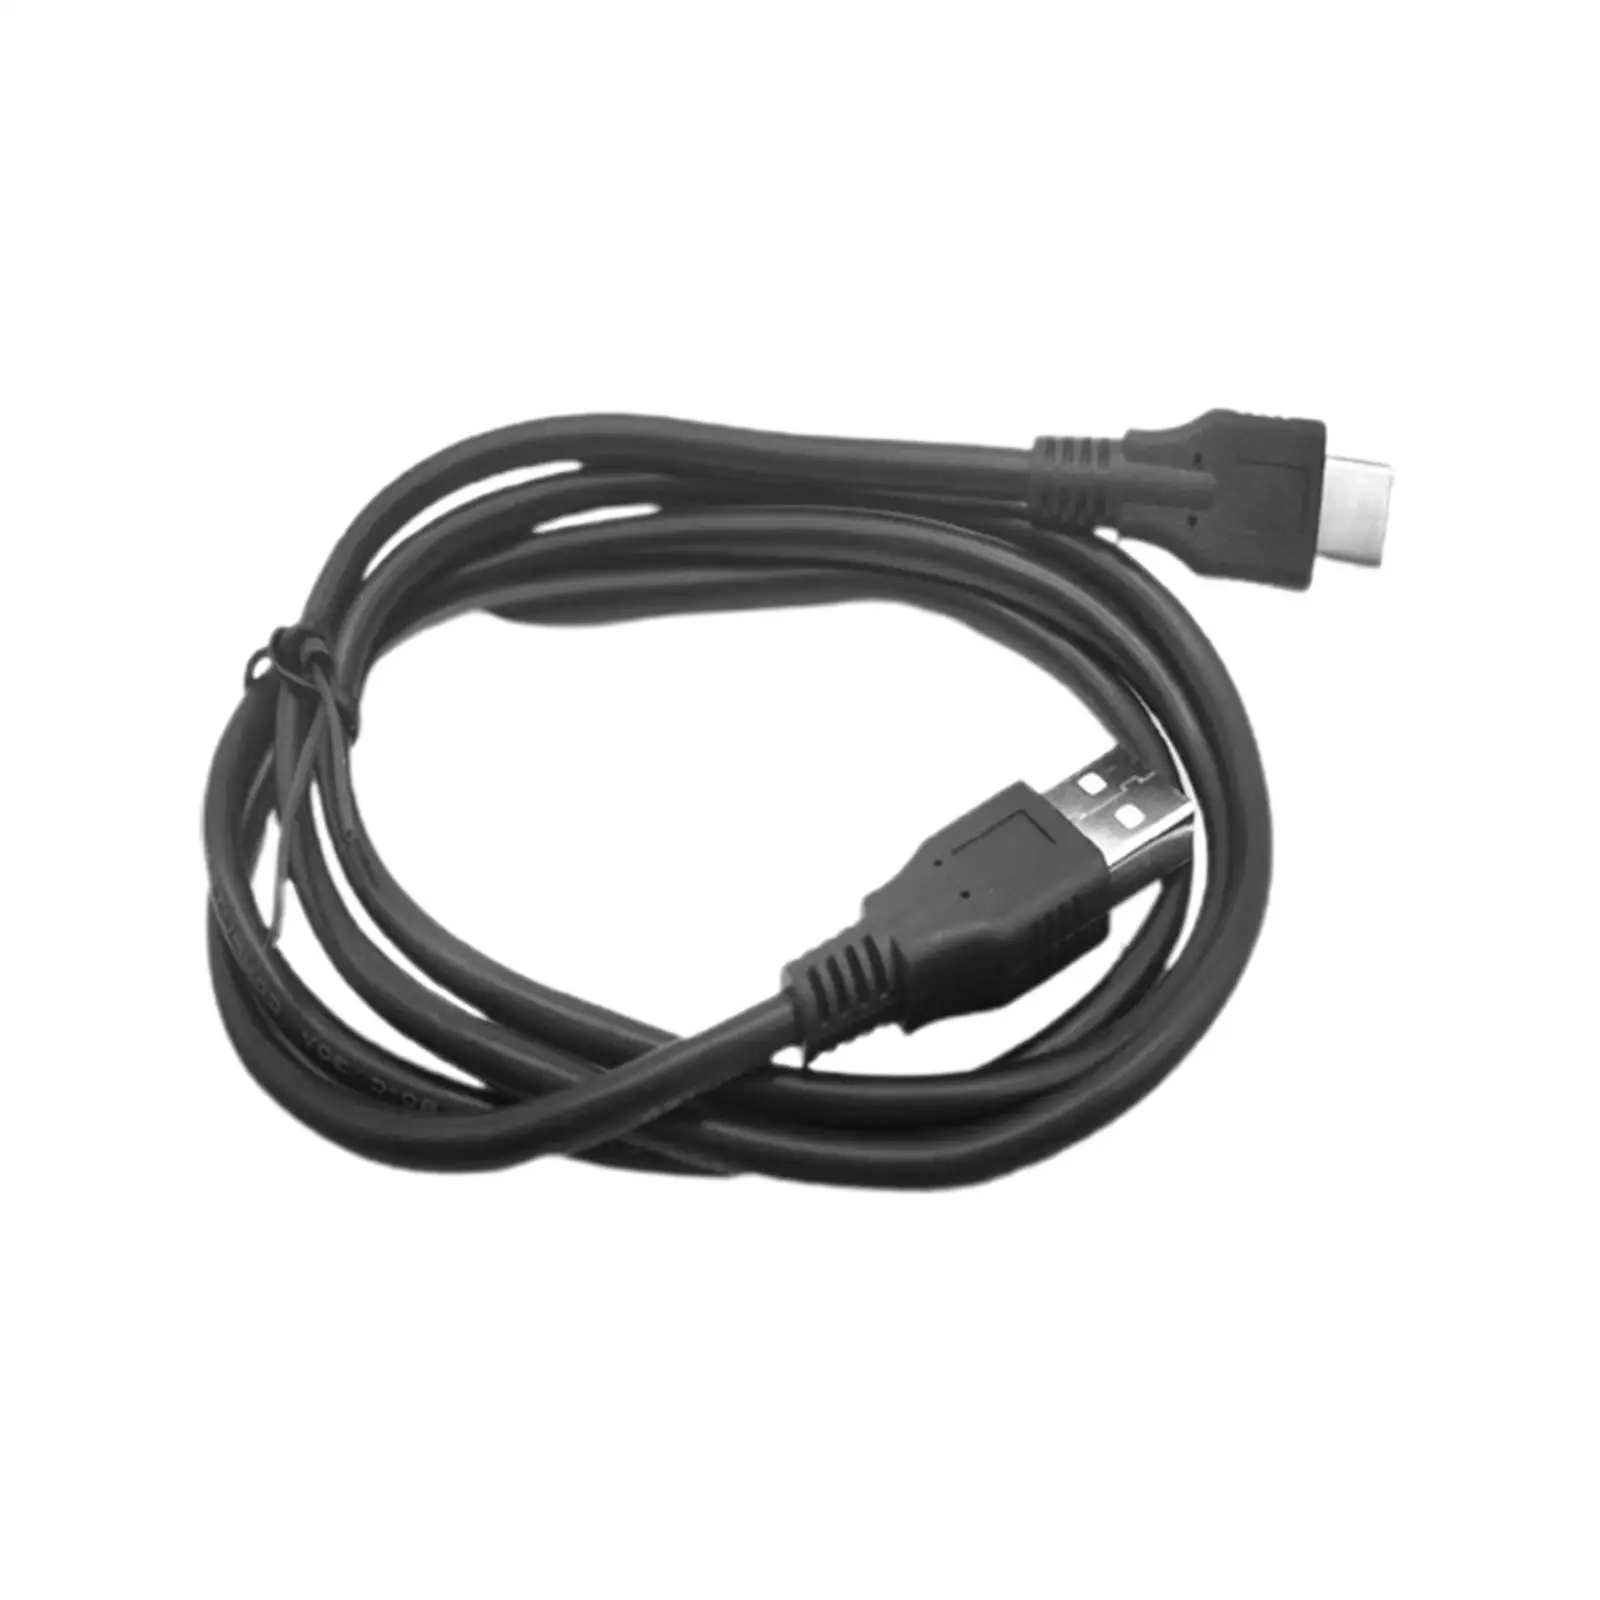 Camera USB Cable Performance Interface Charging Cable Photo Transfer Cable Transfer Wire for Z6 Z7 Uc-e24 Accessories